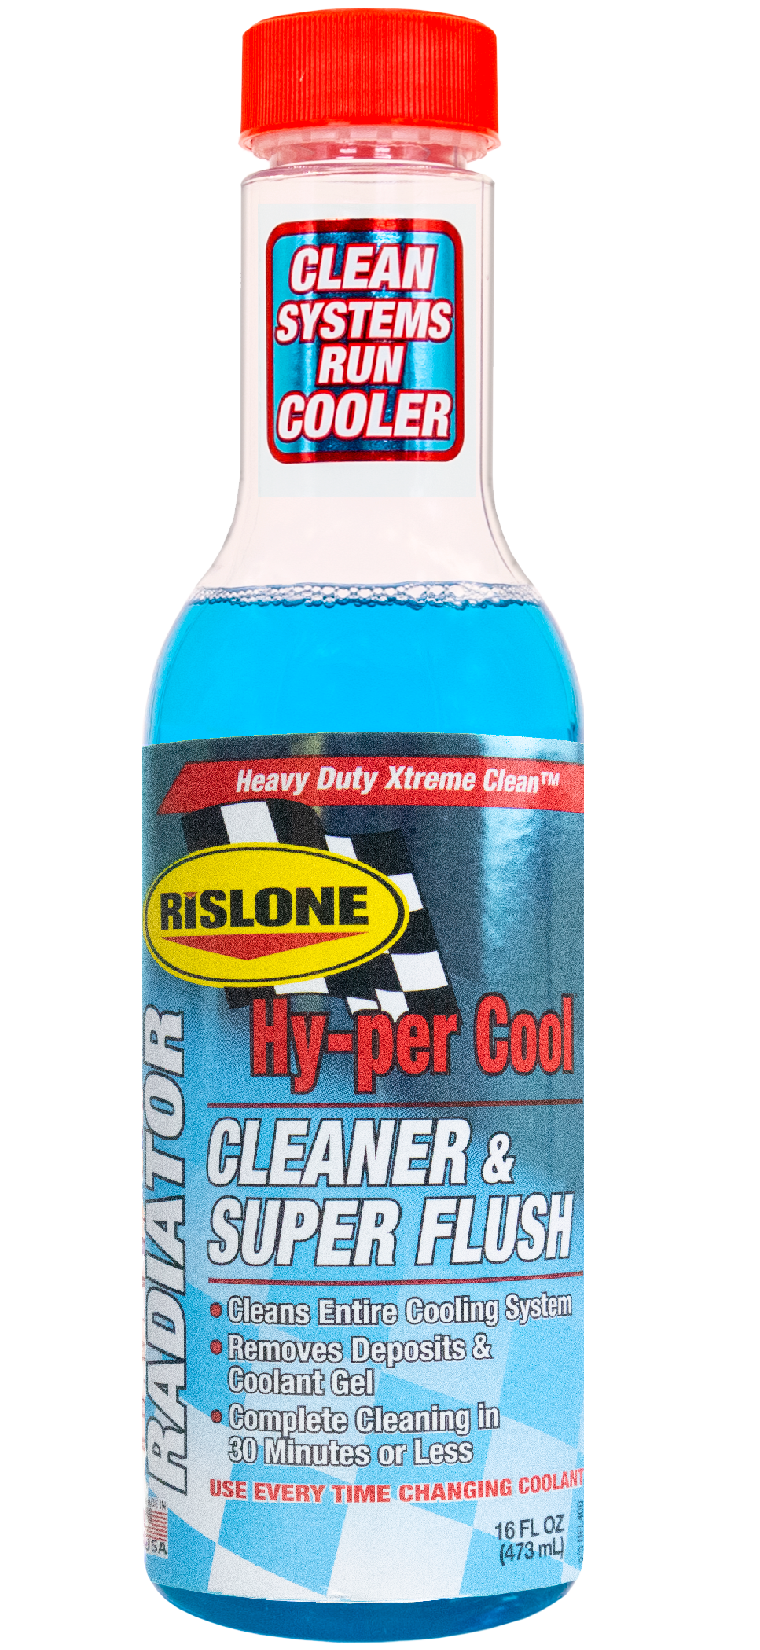 New meaning hedge George Eliot Hy-per Cool Radiator Cleaner & Super Flush | Rislone